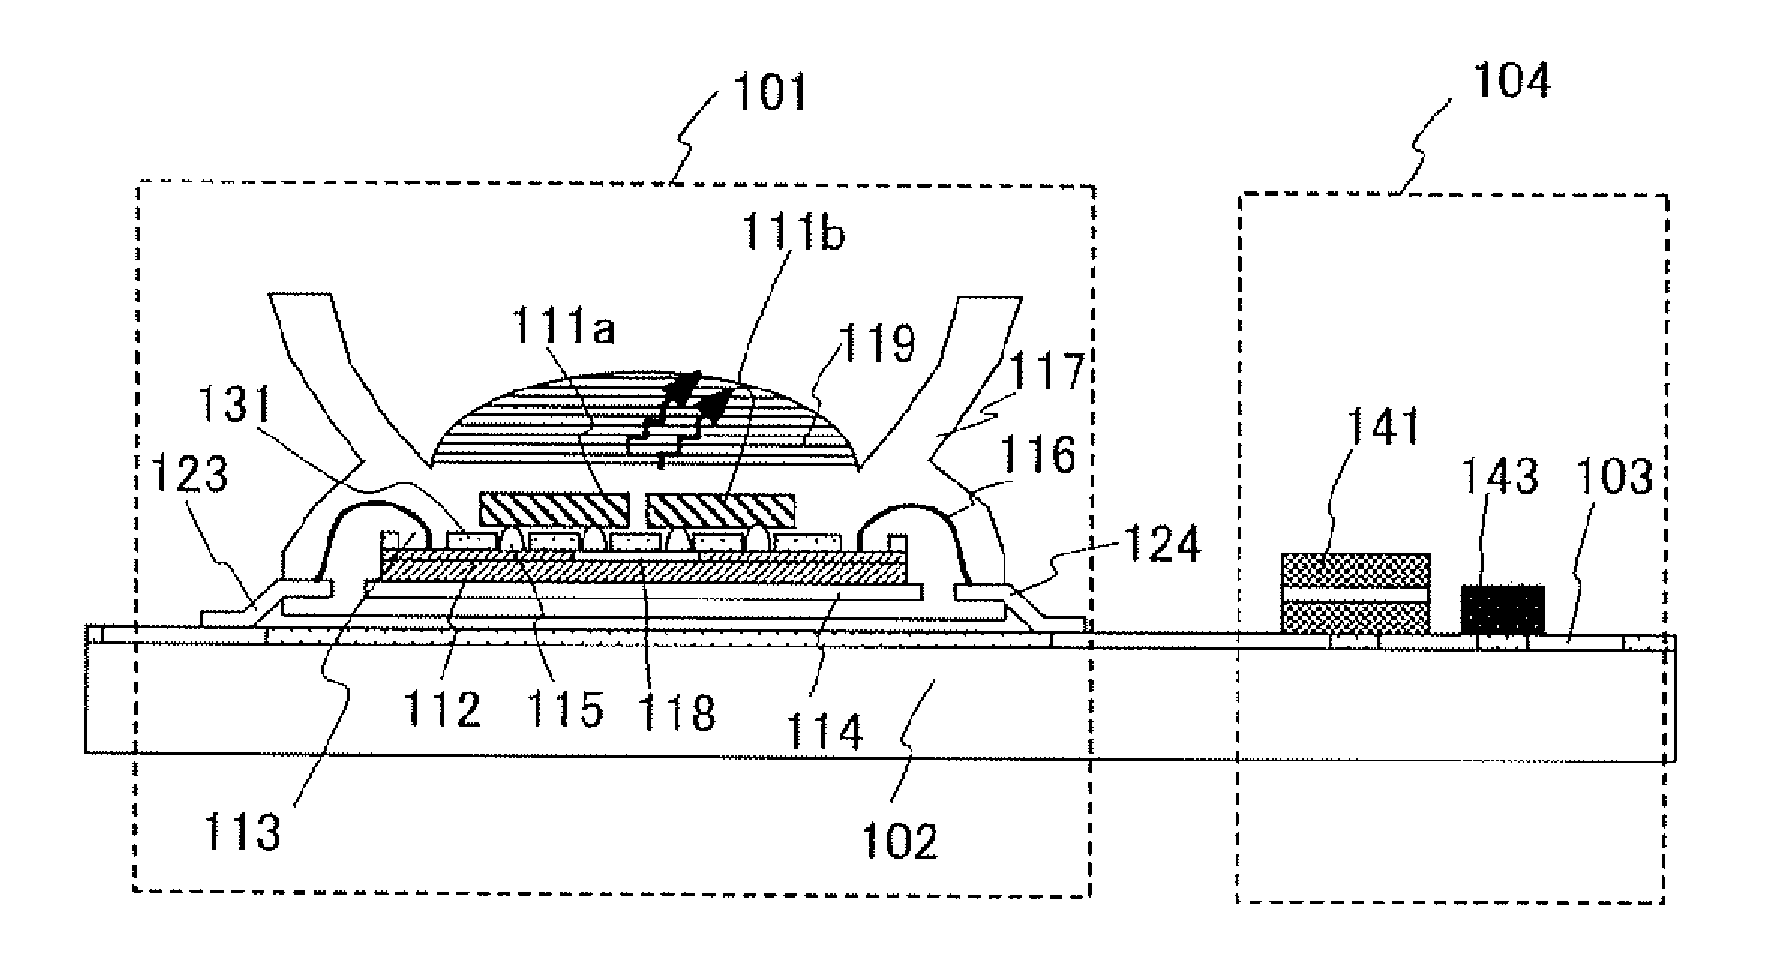 Semiconductor chip for driving light emitting element, light emitting device, and lighting device